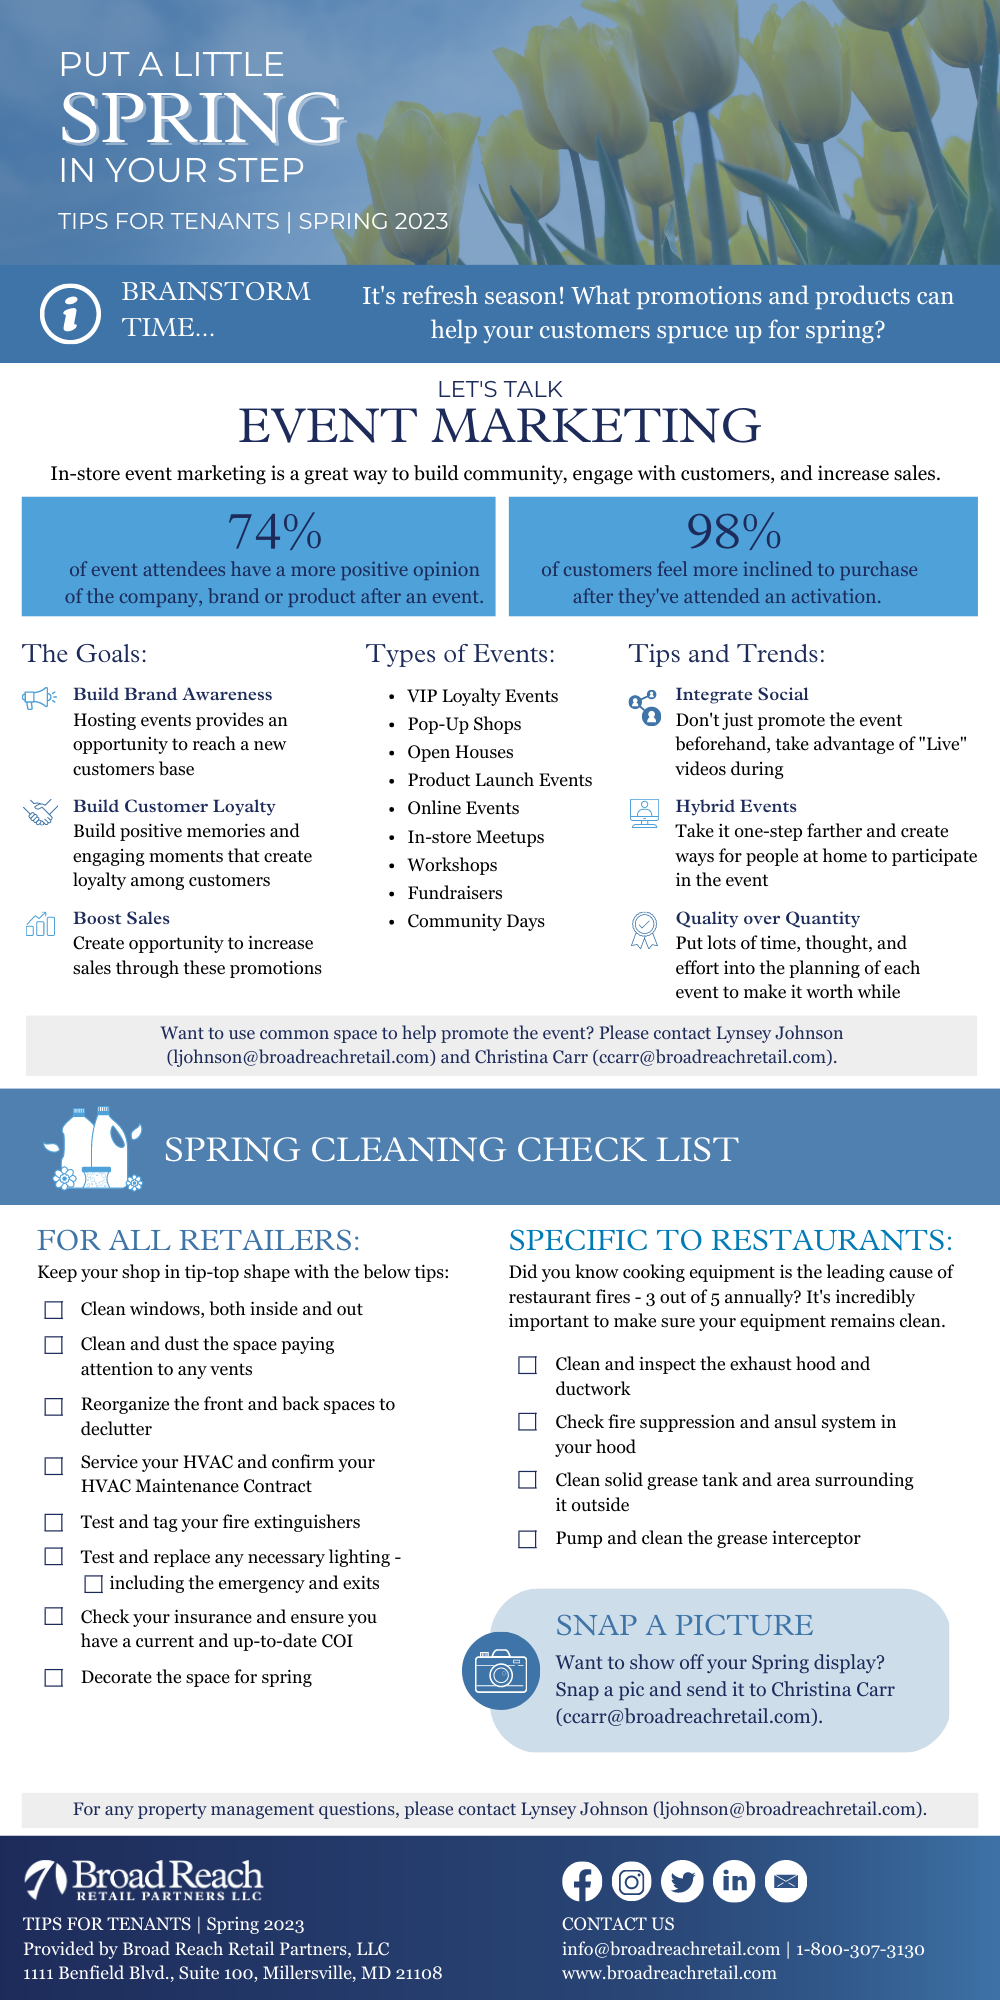 Tips for Tenants infographic sharing spring tips.